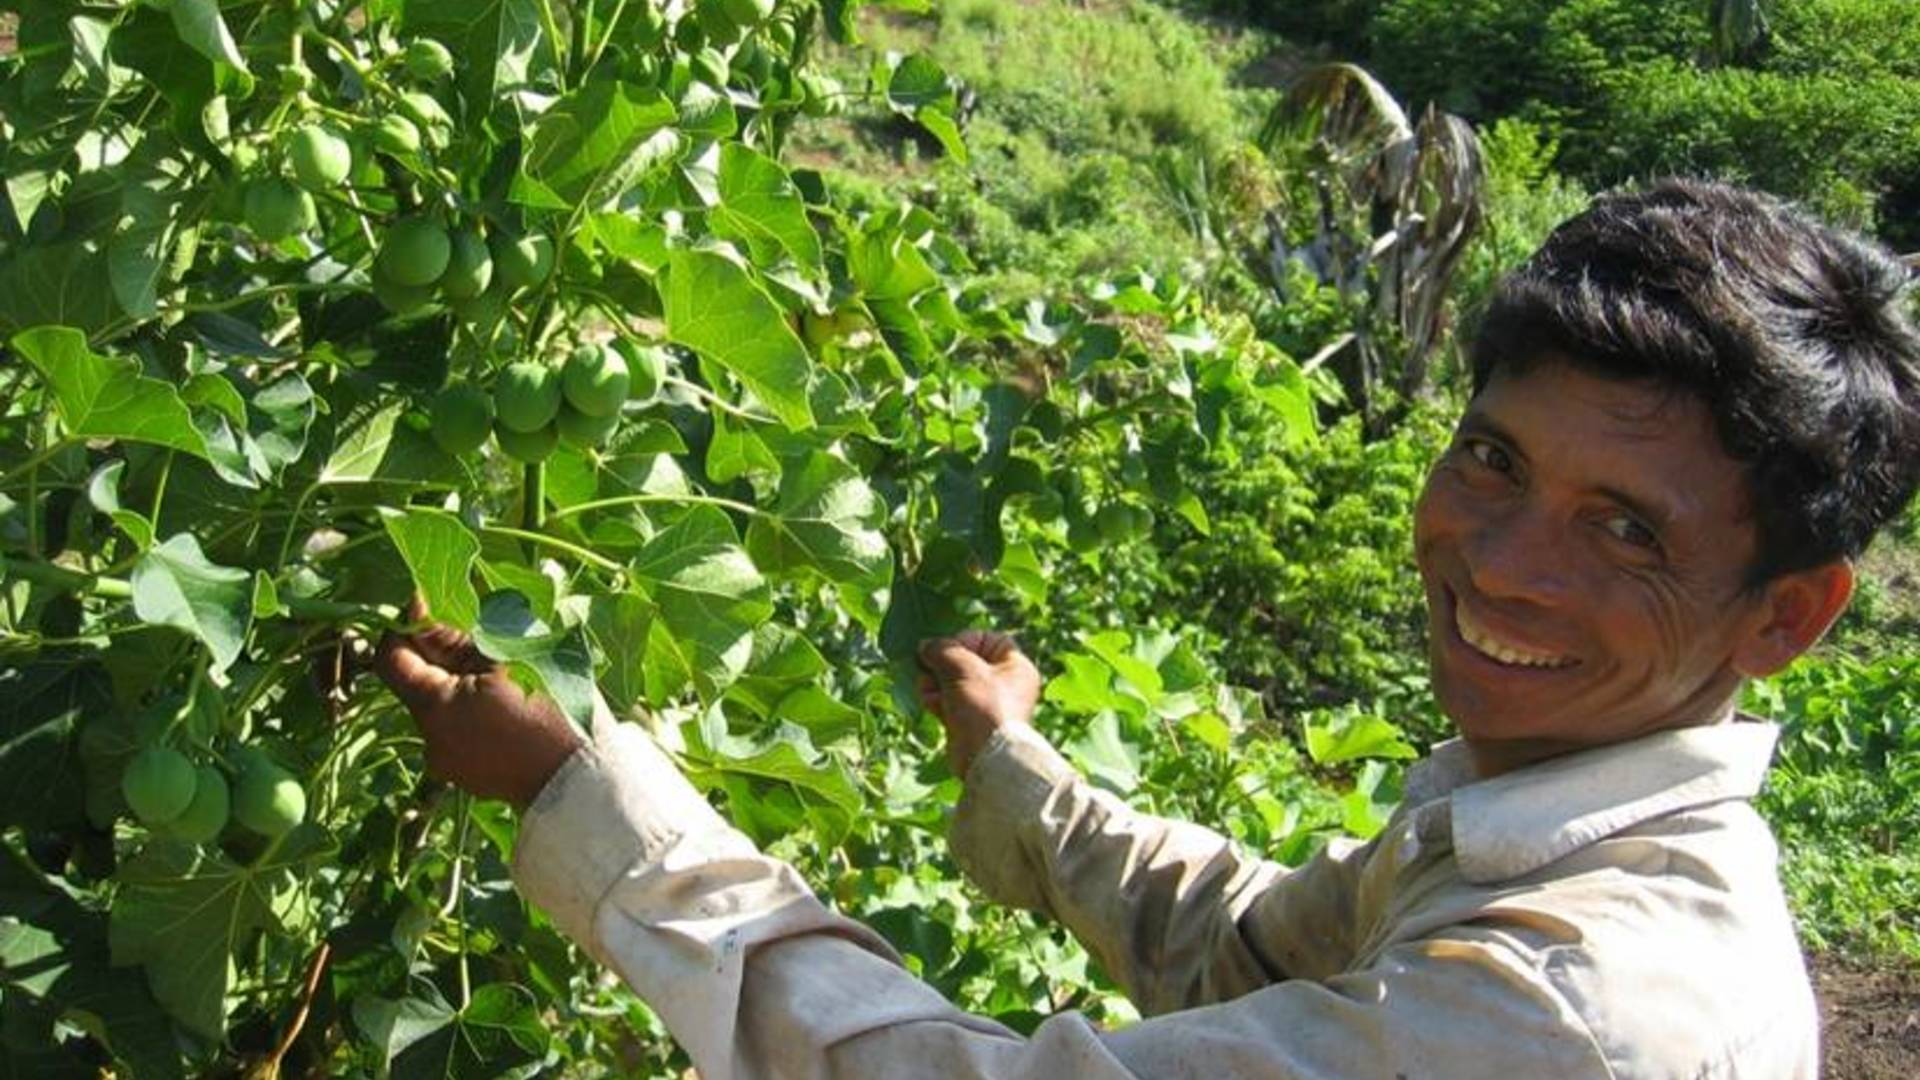 Energy recovery from the production of jatropha in the Koutiala region